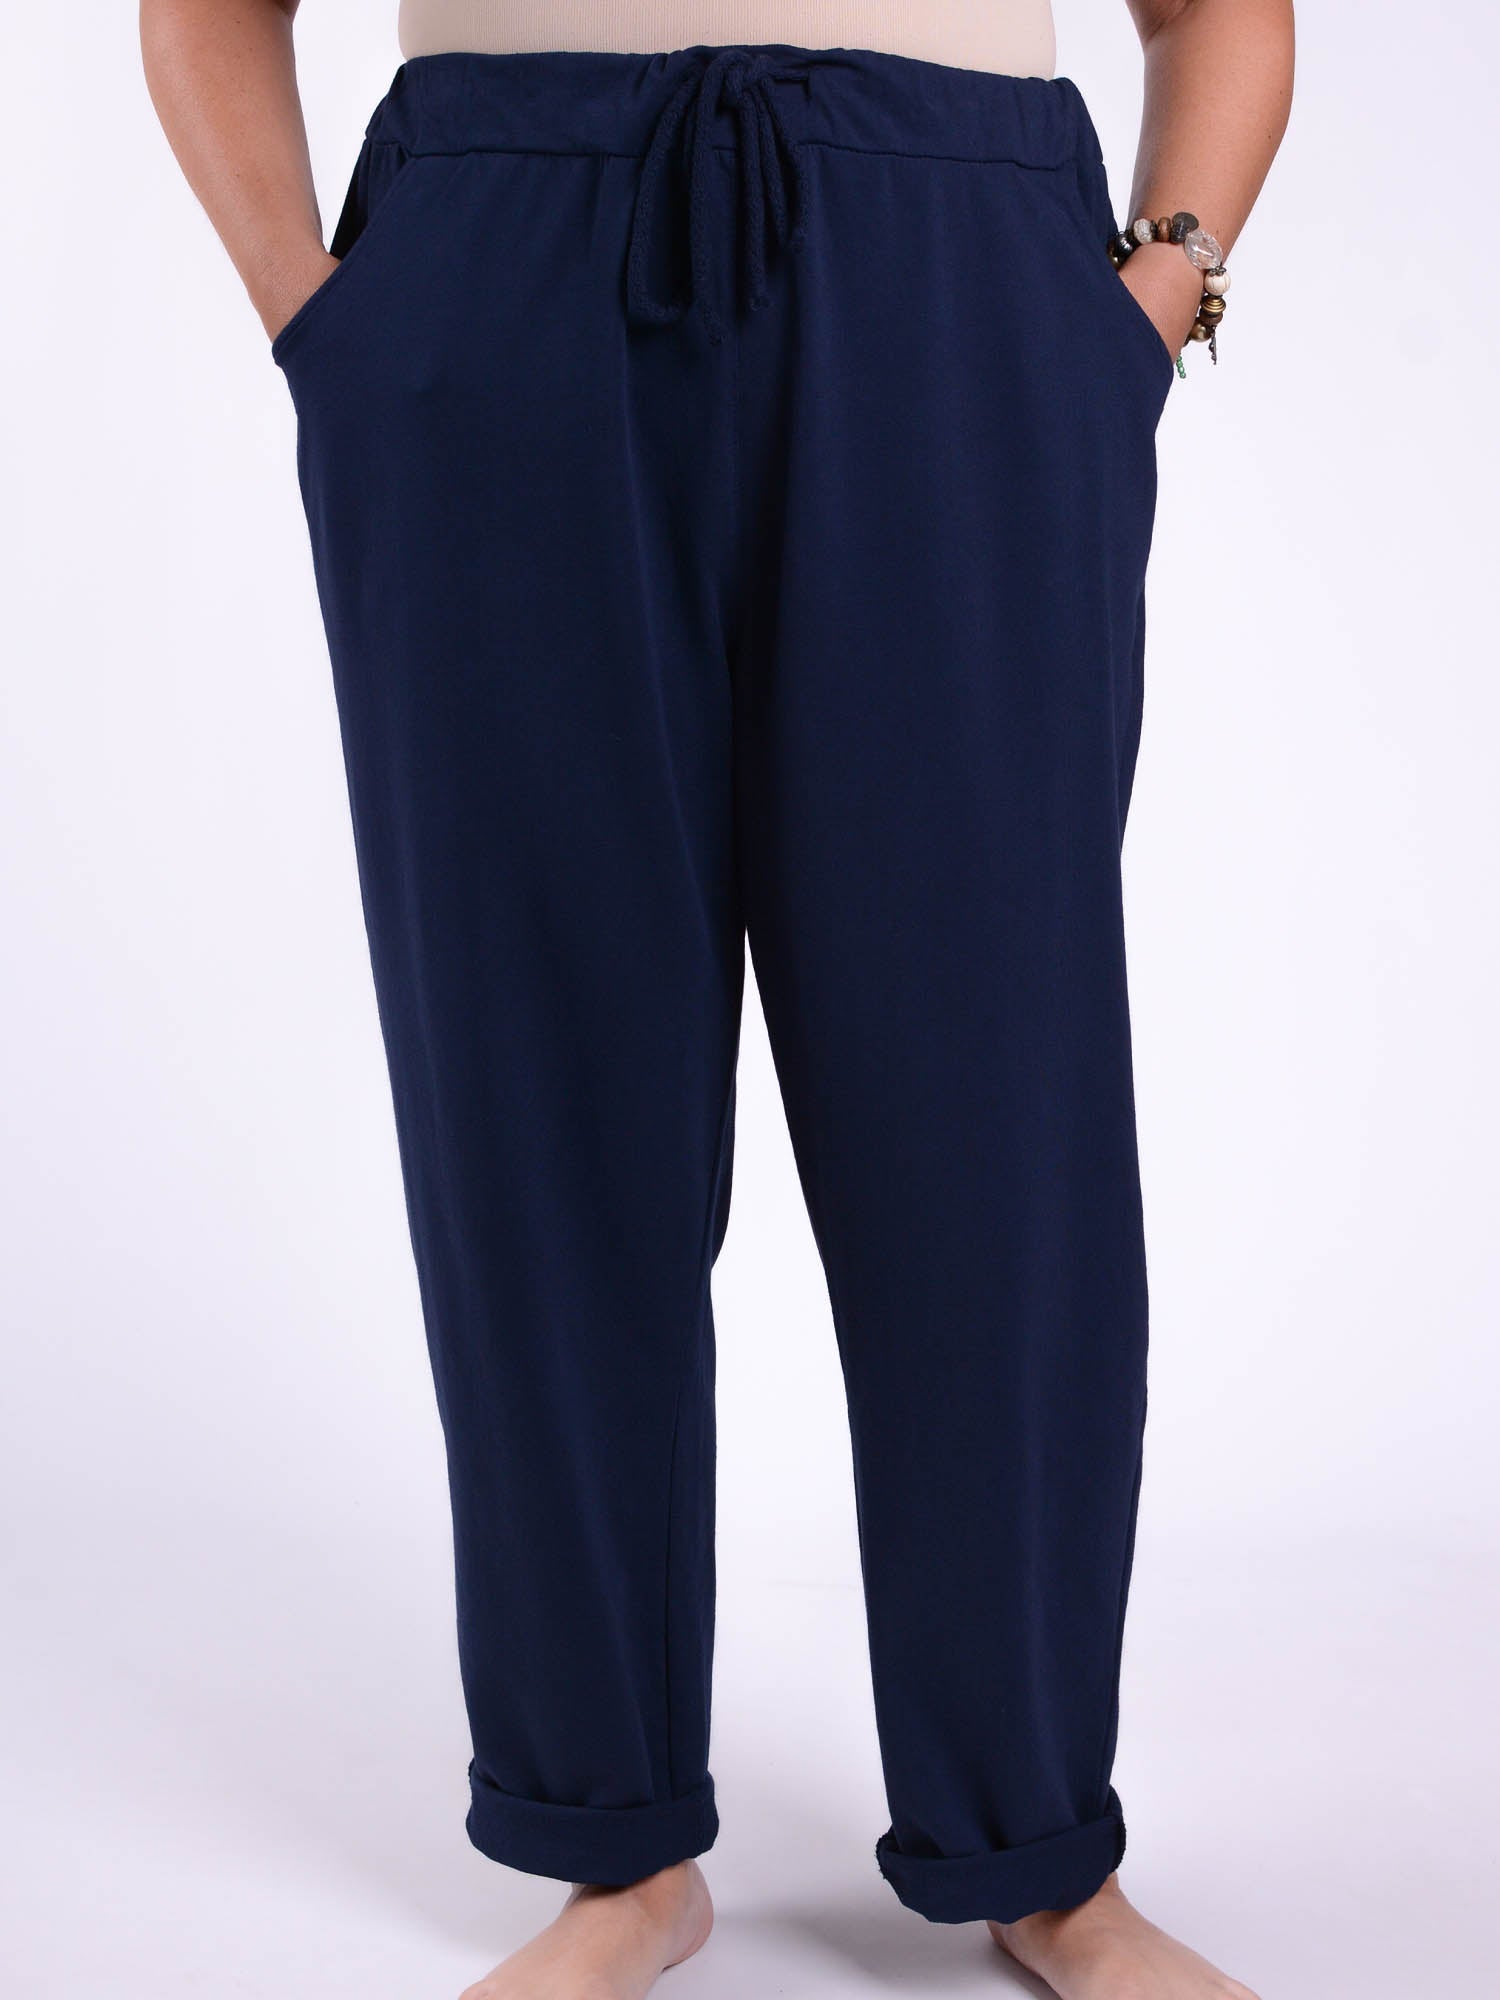 Basic Cotton Joggers/Trousers - 10495, Trousers, Pure Plus Clothing, Lagenlook Clothing, Plus Size Fashion, Over 50 Fashion